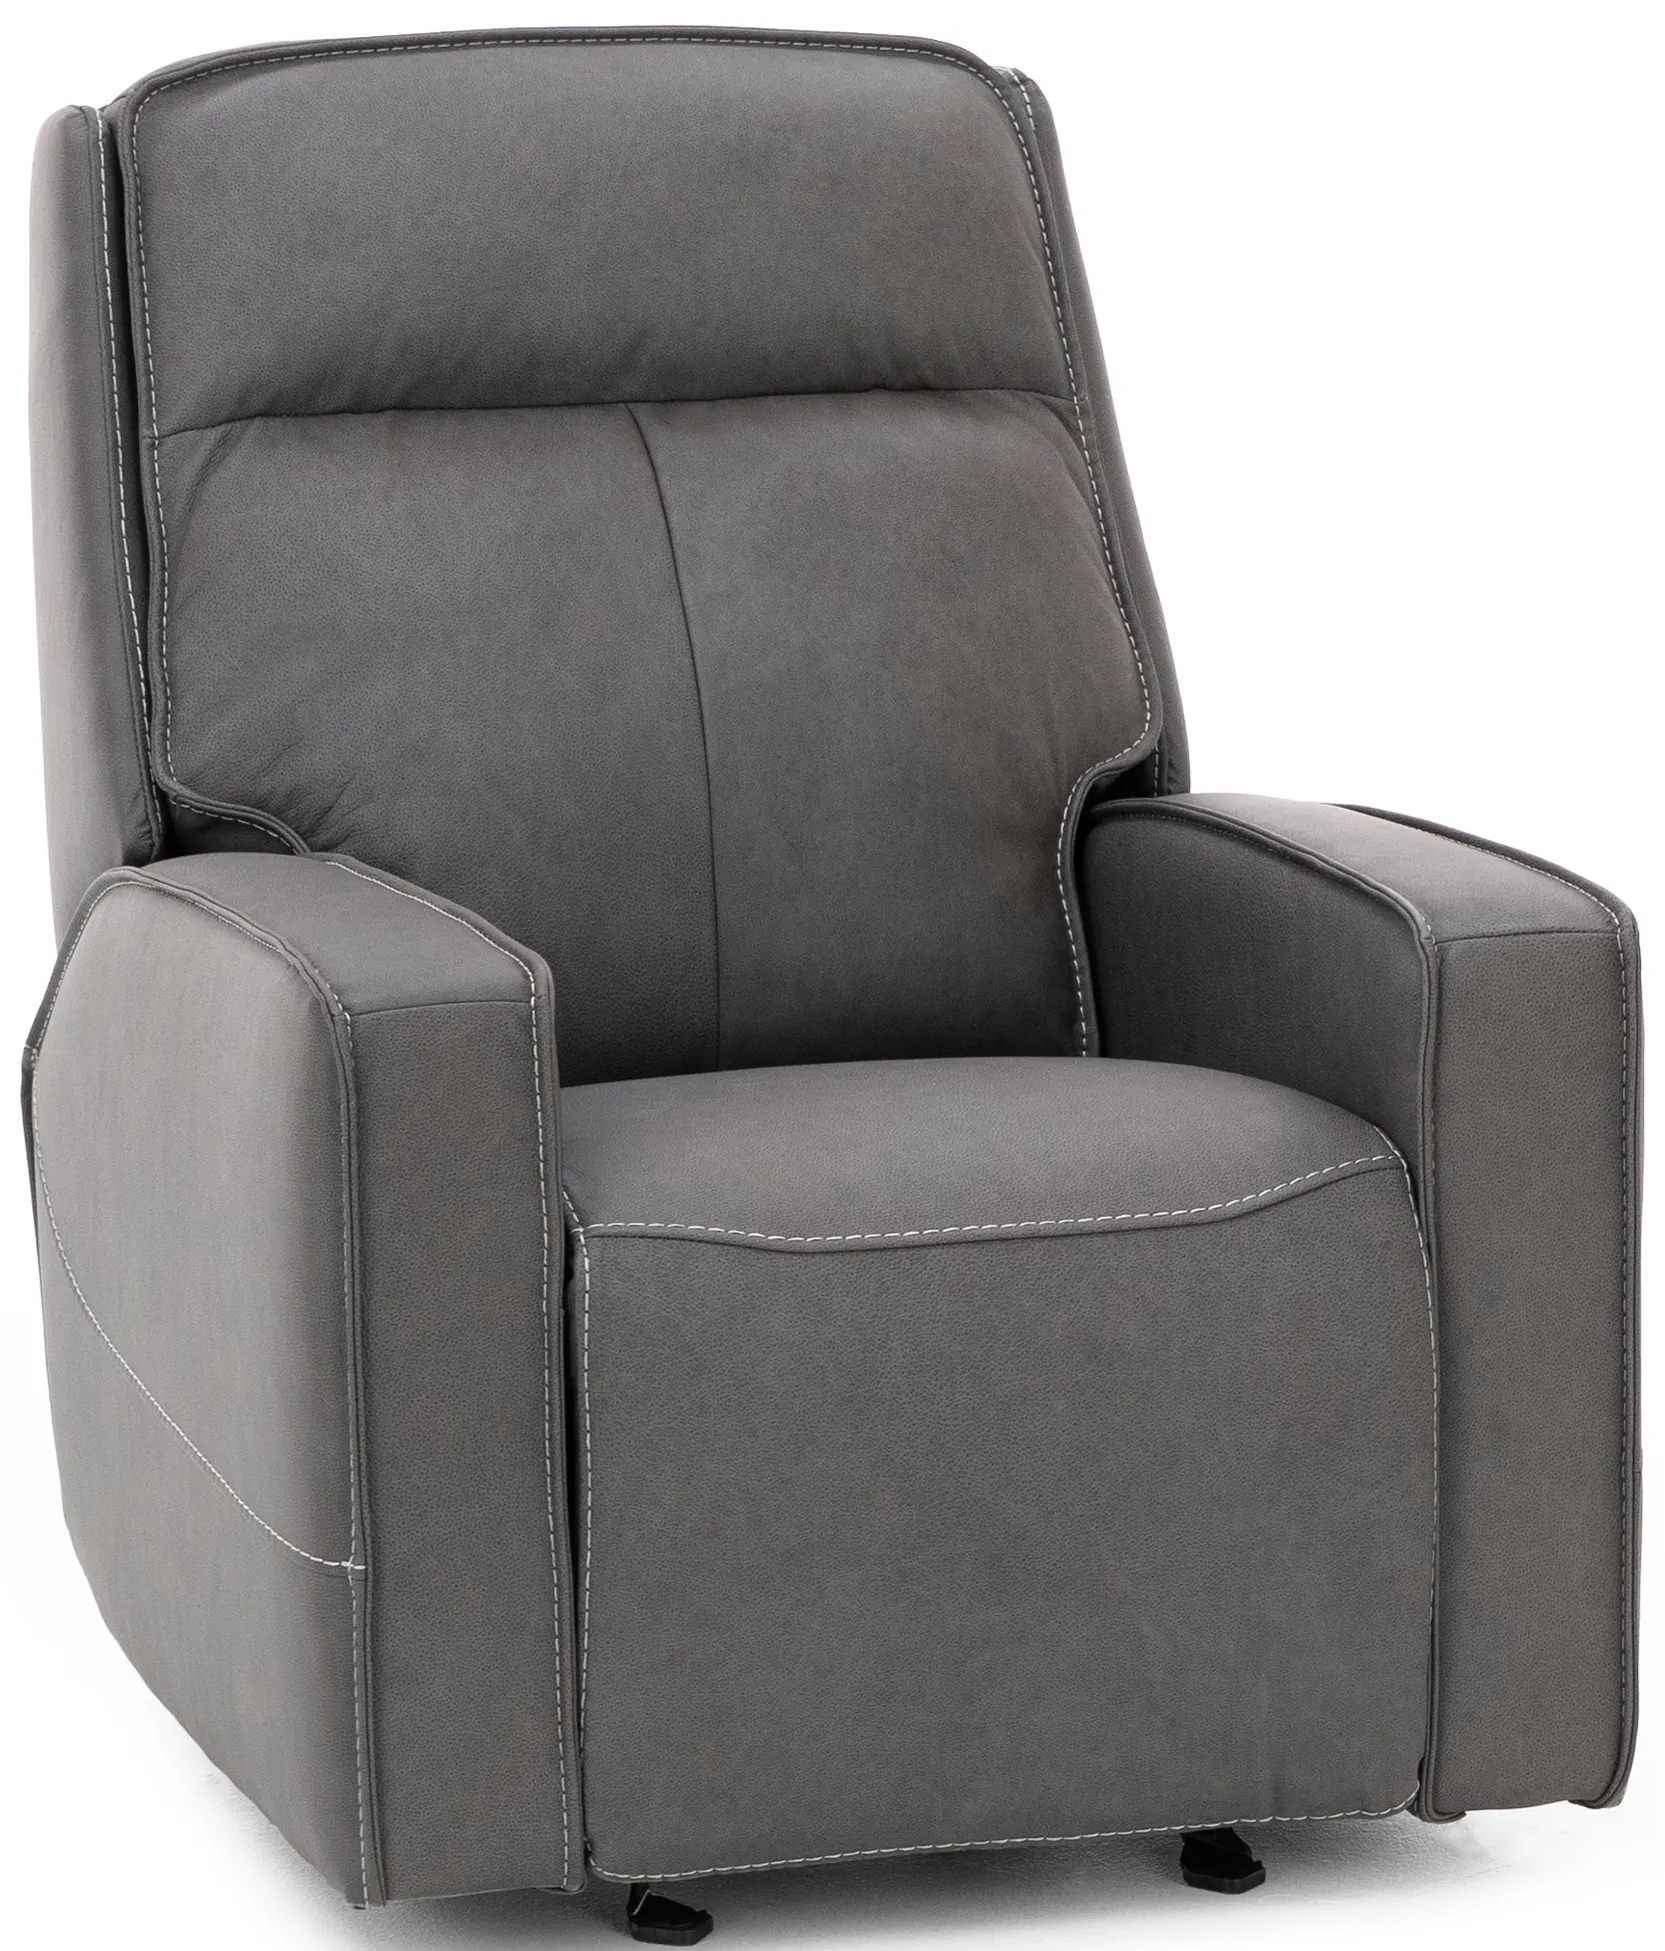 Morgan Leather Fully Loaded Glider Recliner in Smoke